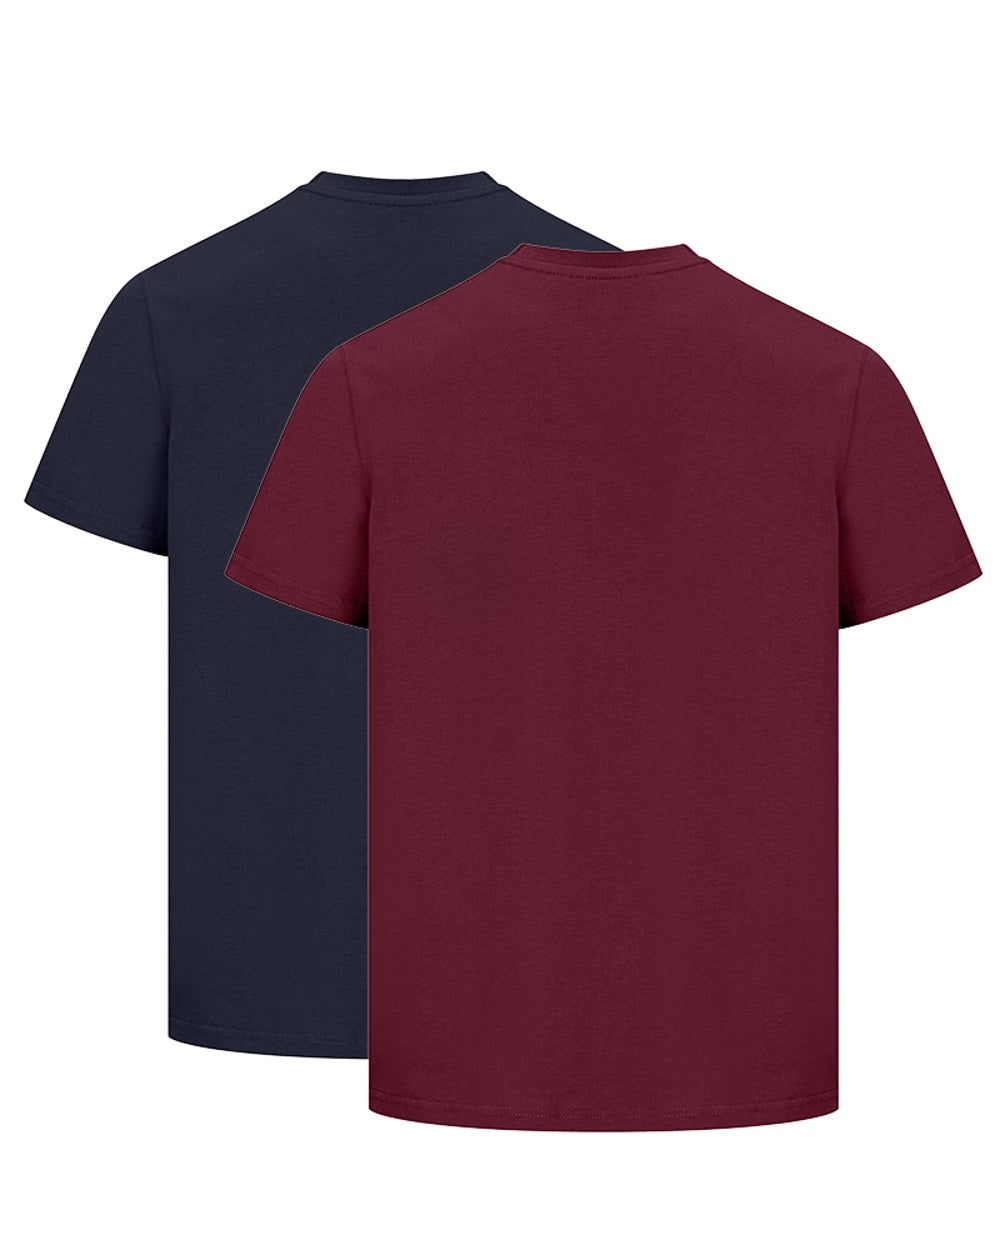 Hoggs of Fife Sandwood 2 Pack Cotton T-Shirts in Midnight/Merlot 